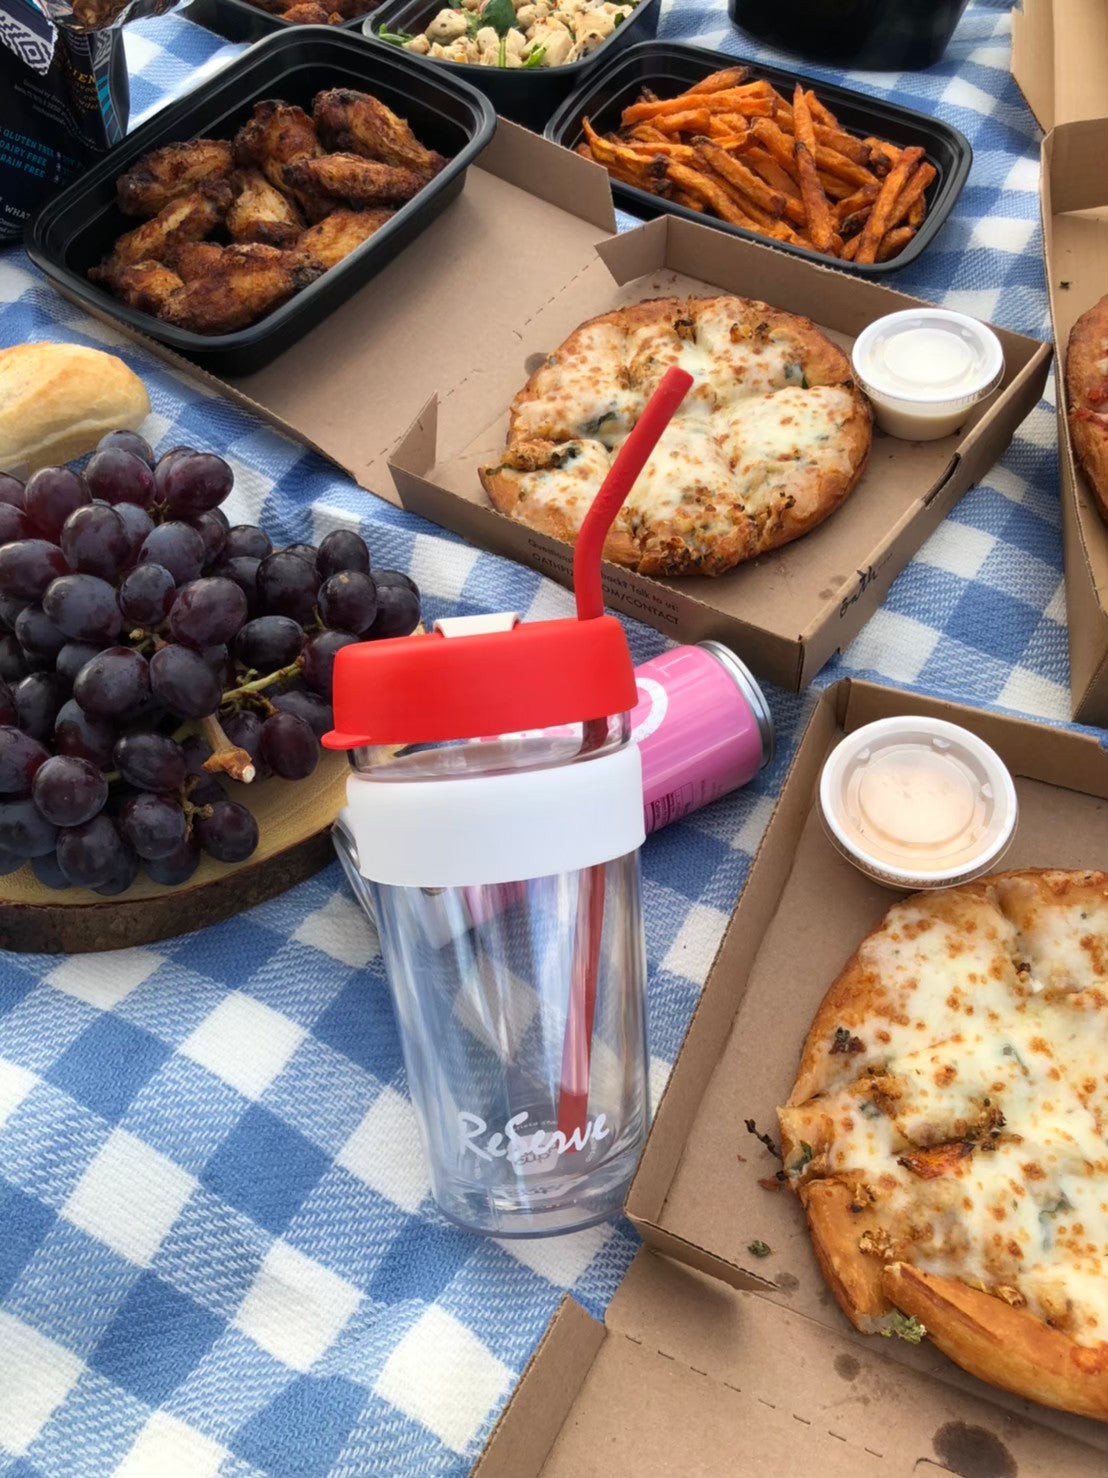 ReServe red reusable cup and red silicone straw on a picnic cloth surrounded by pizza, grape, fries, chicken wings, and other food